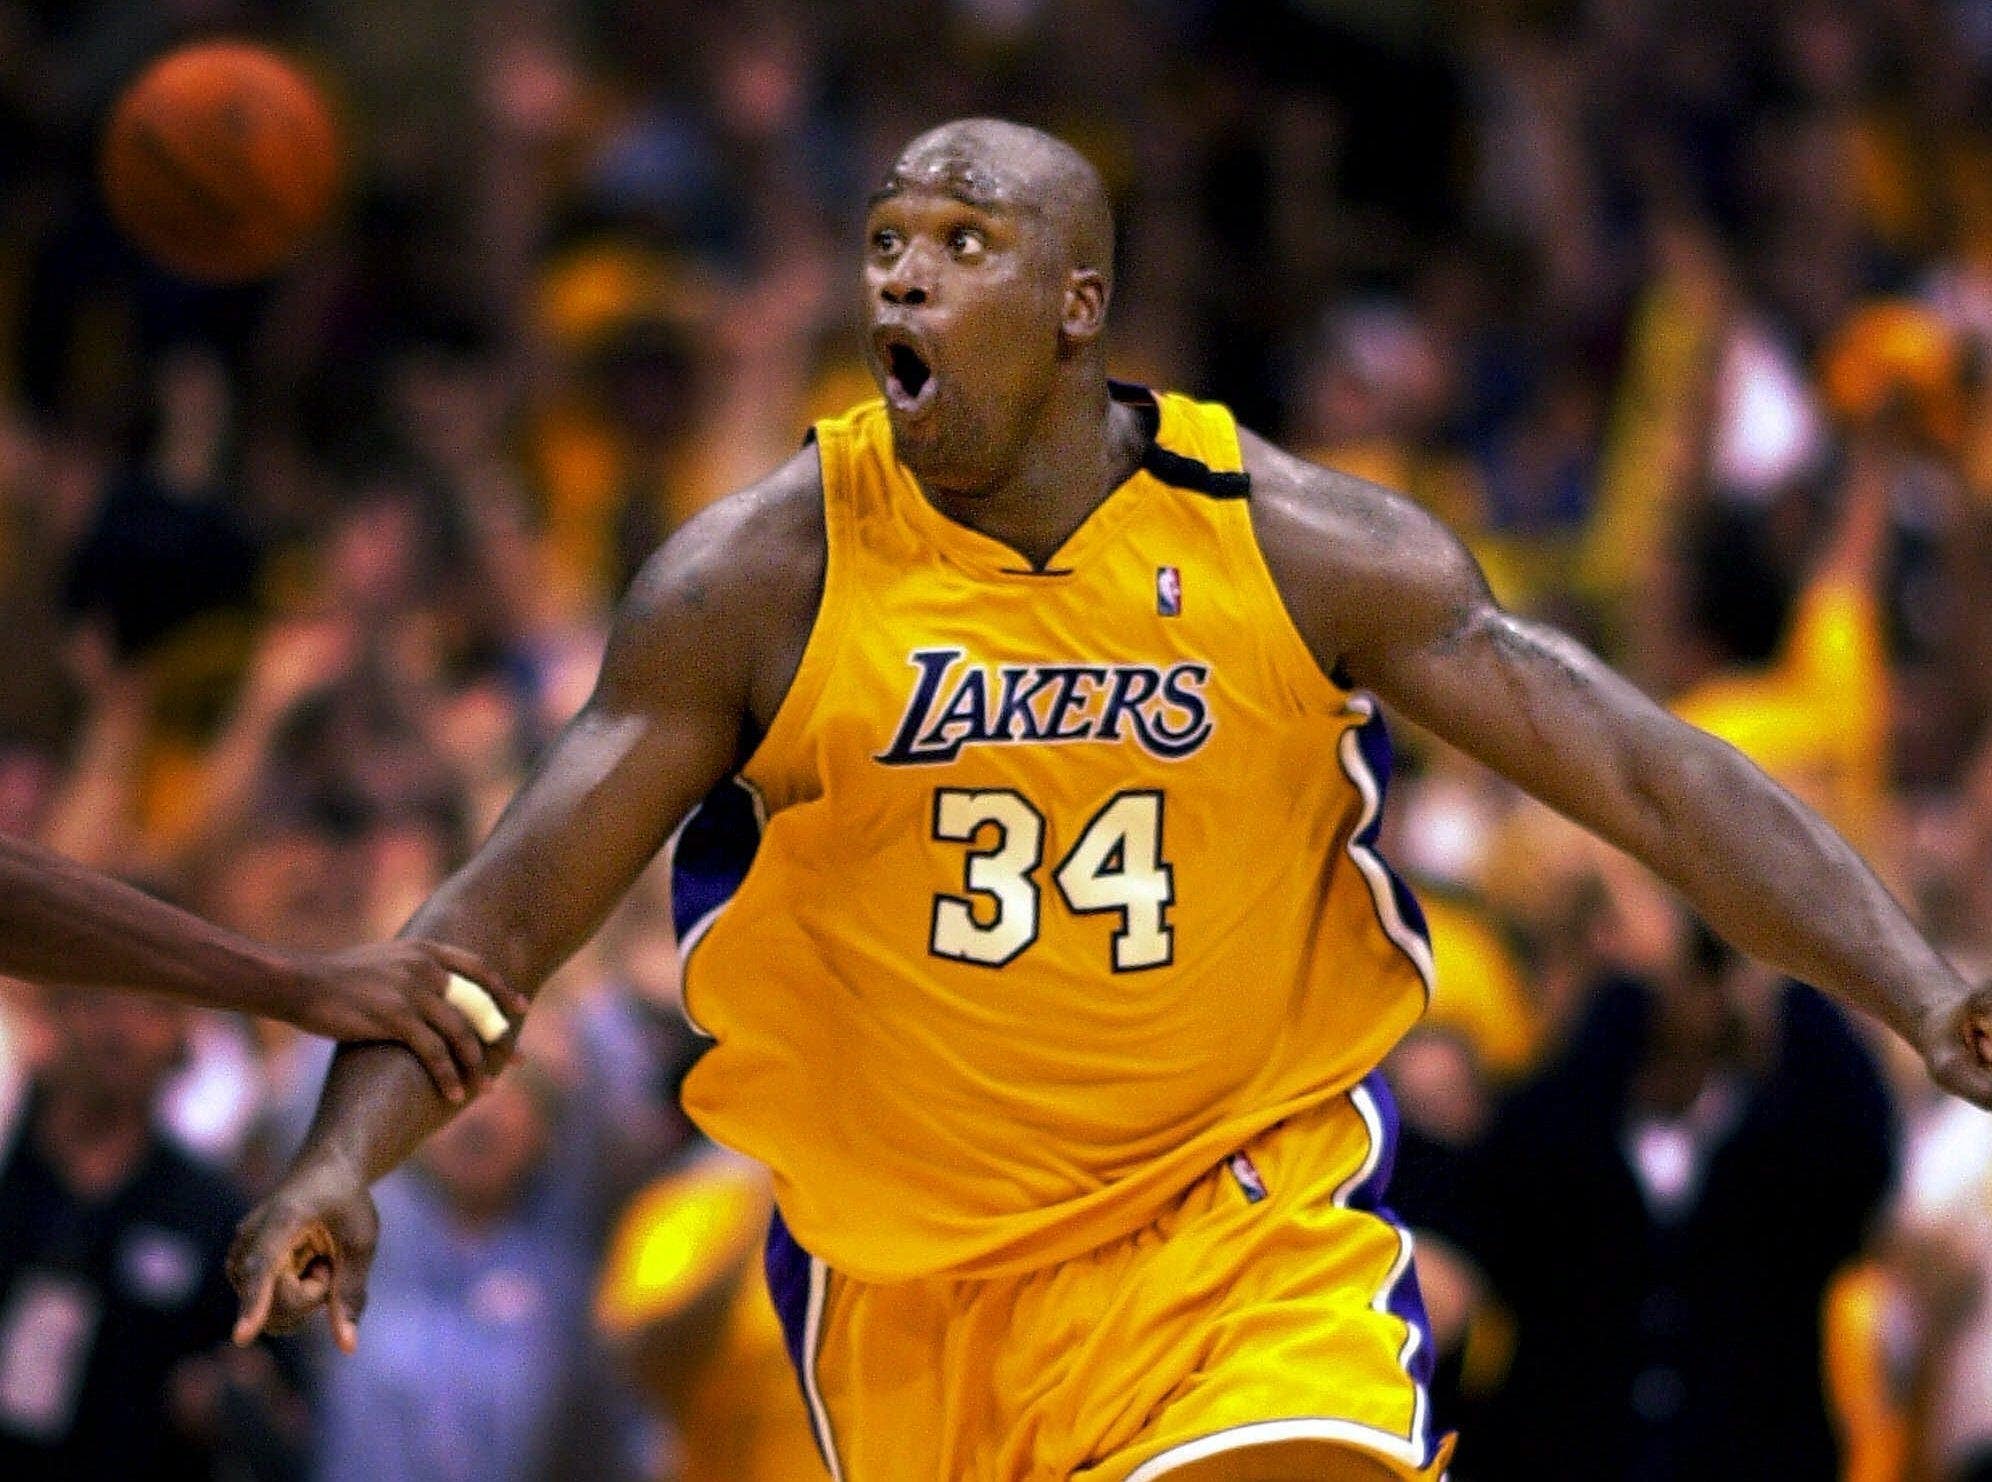 Shaq's monster dunk after an alley-oop from Kobe Bryant